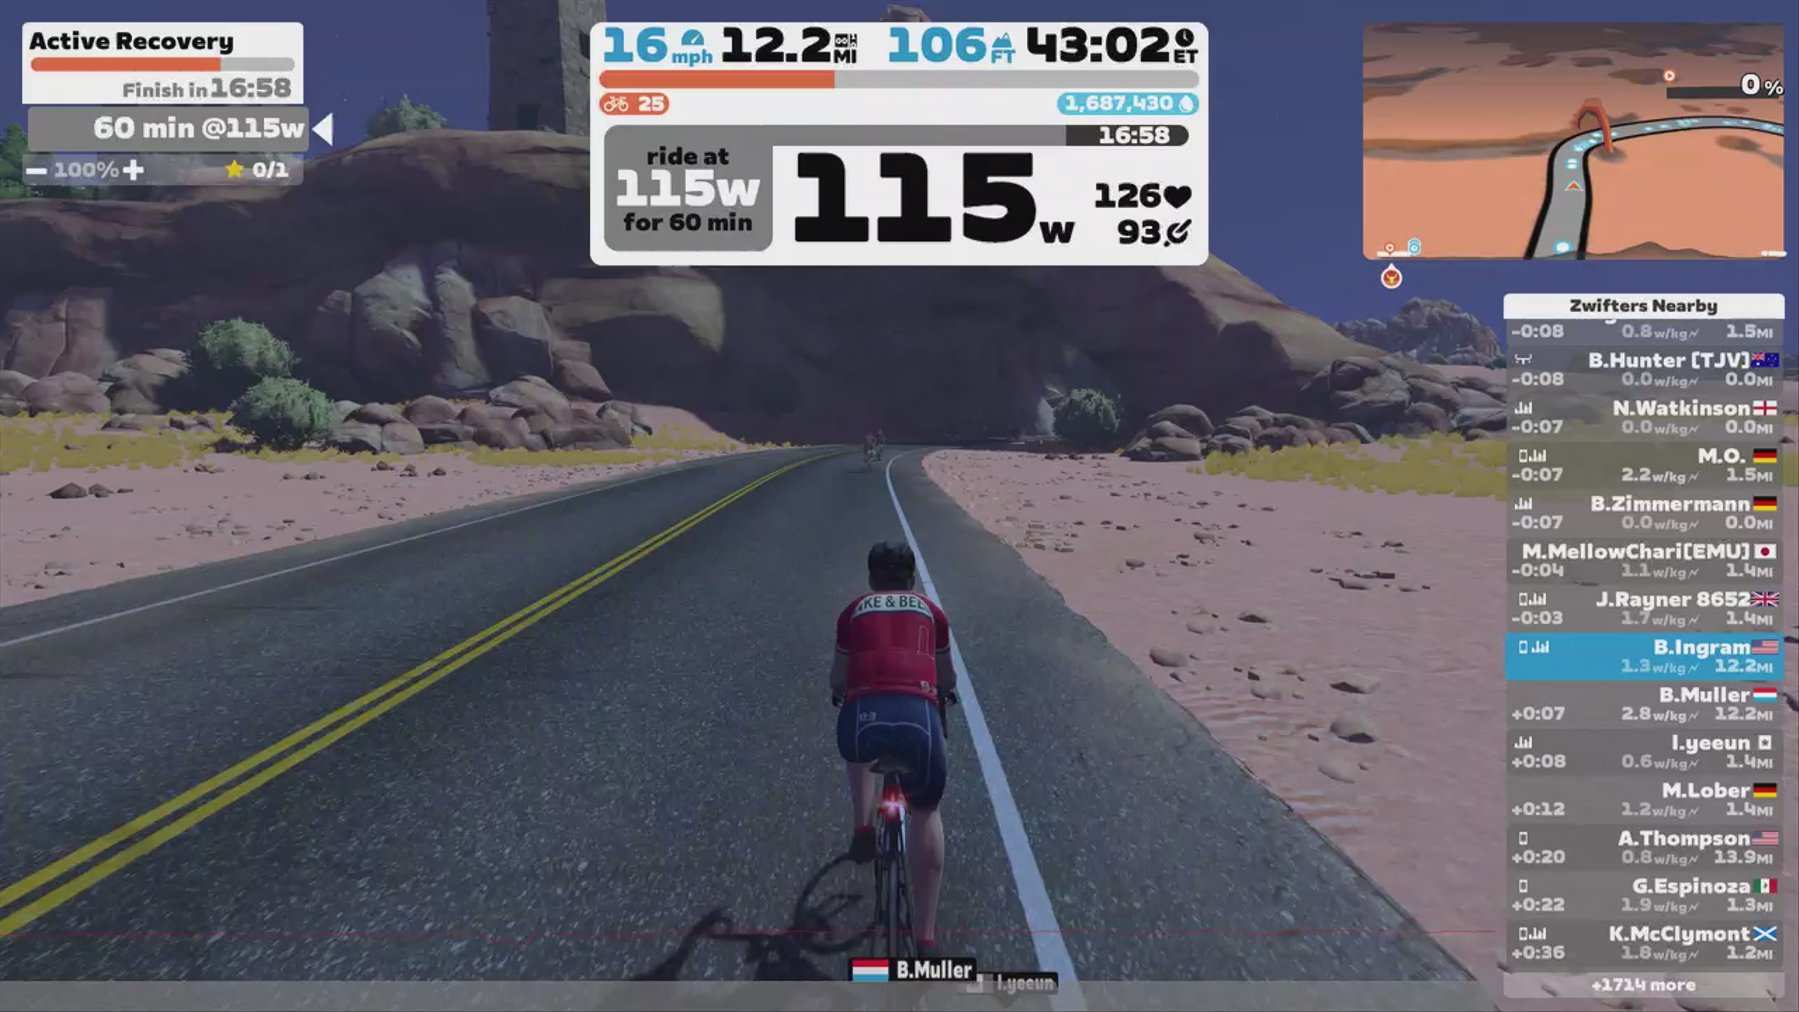 Zwift - Active Recovery in Watopia